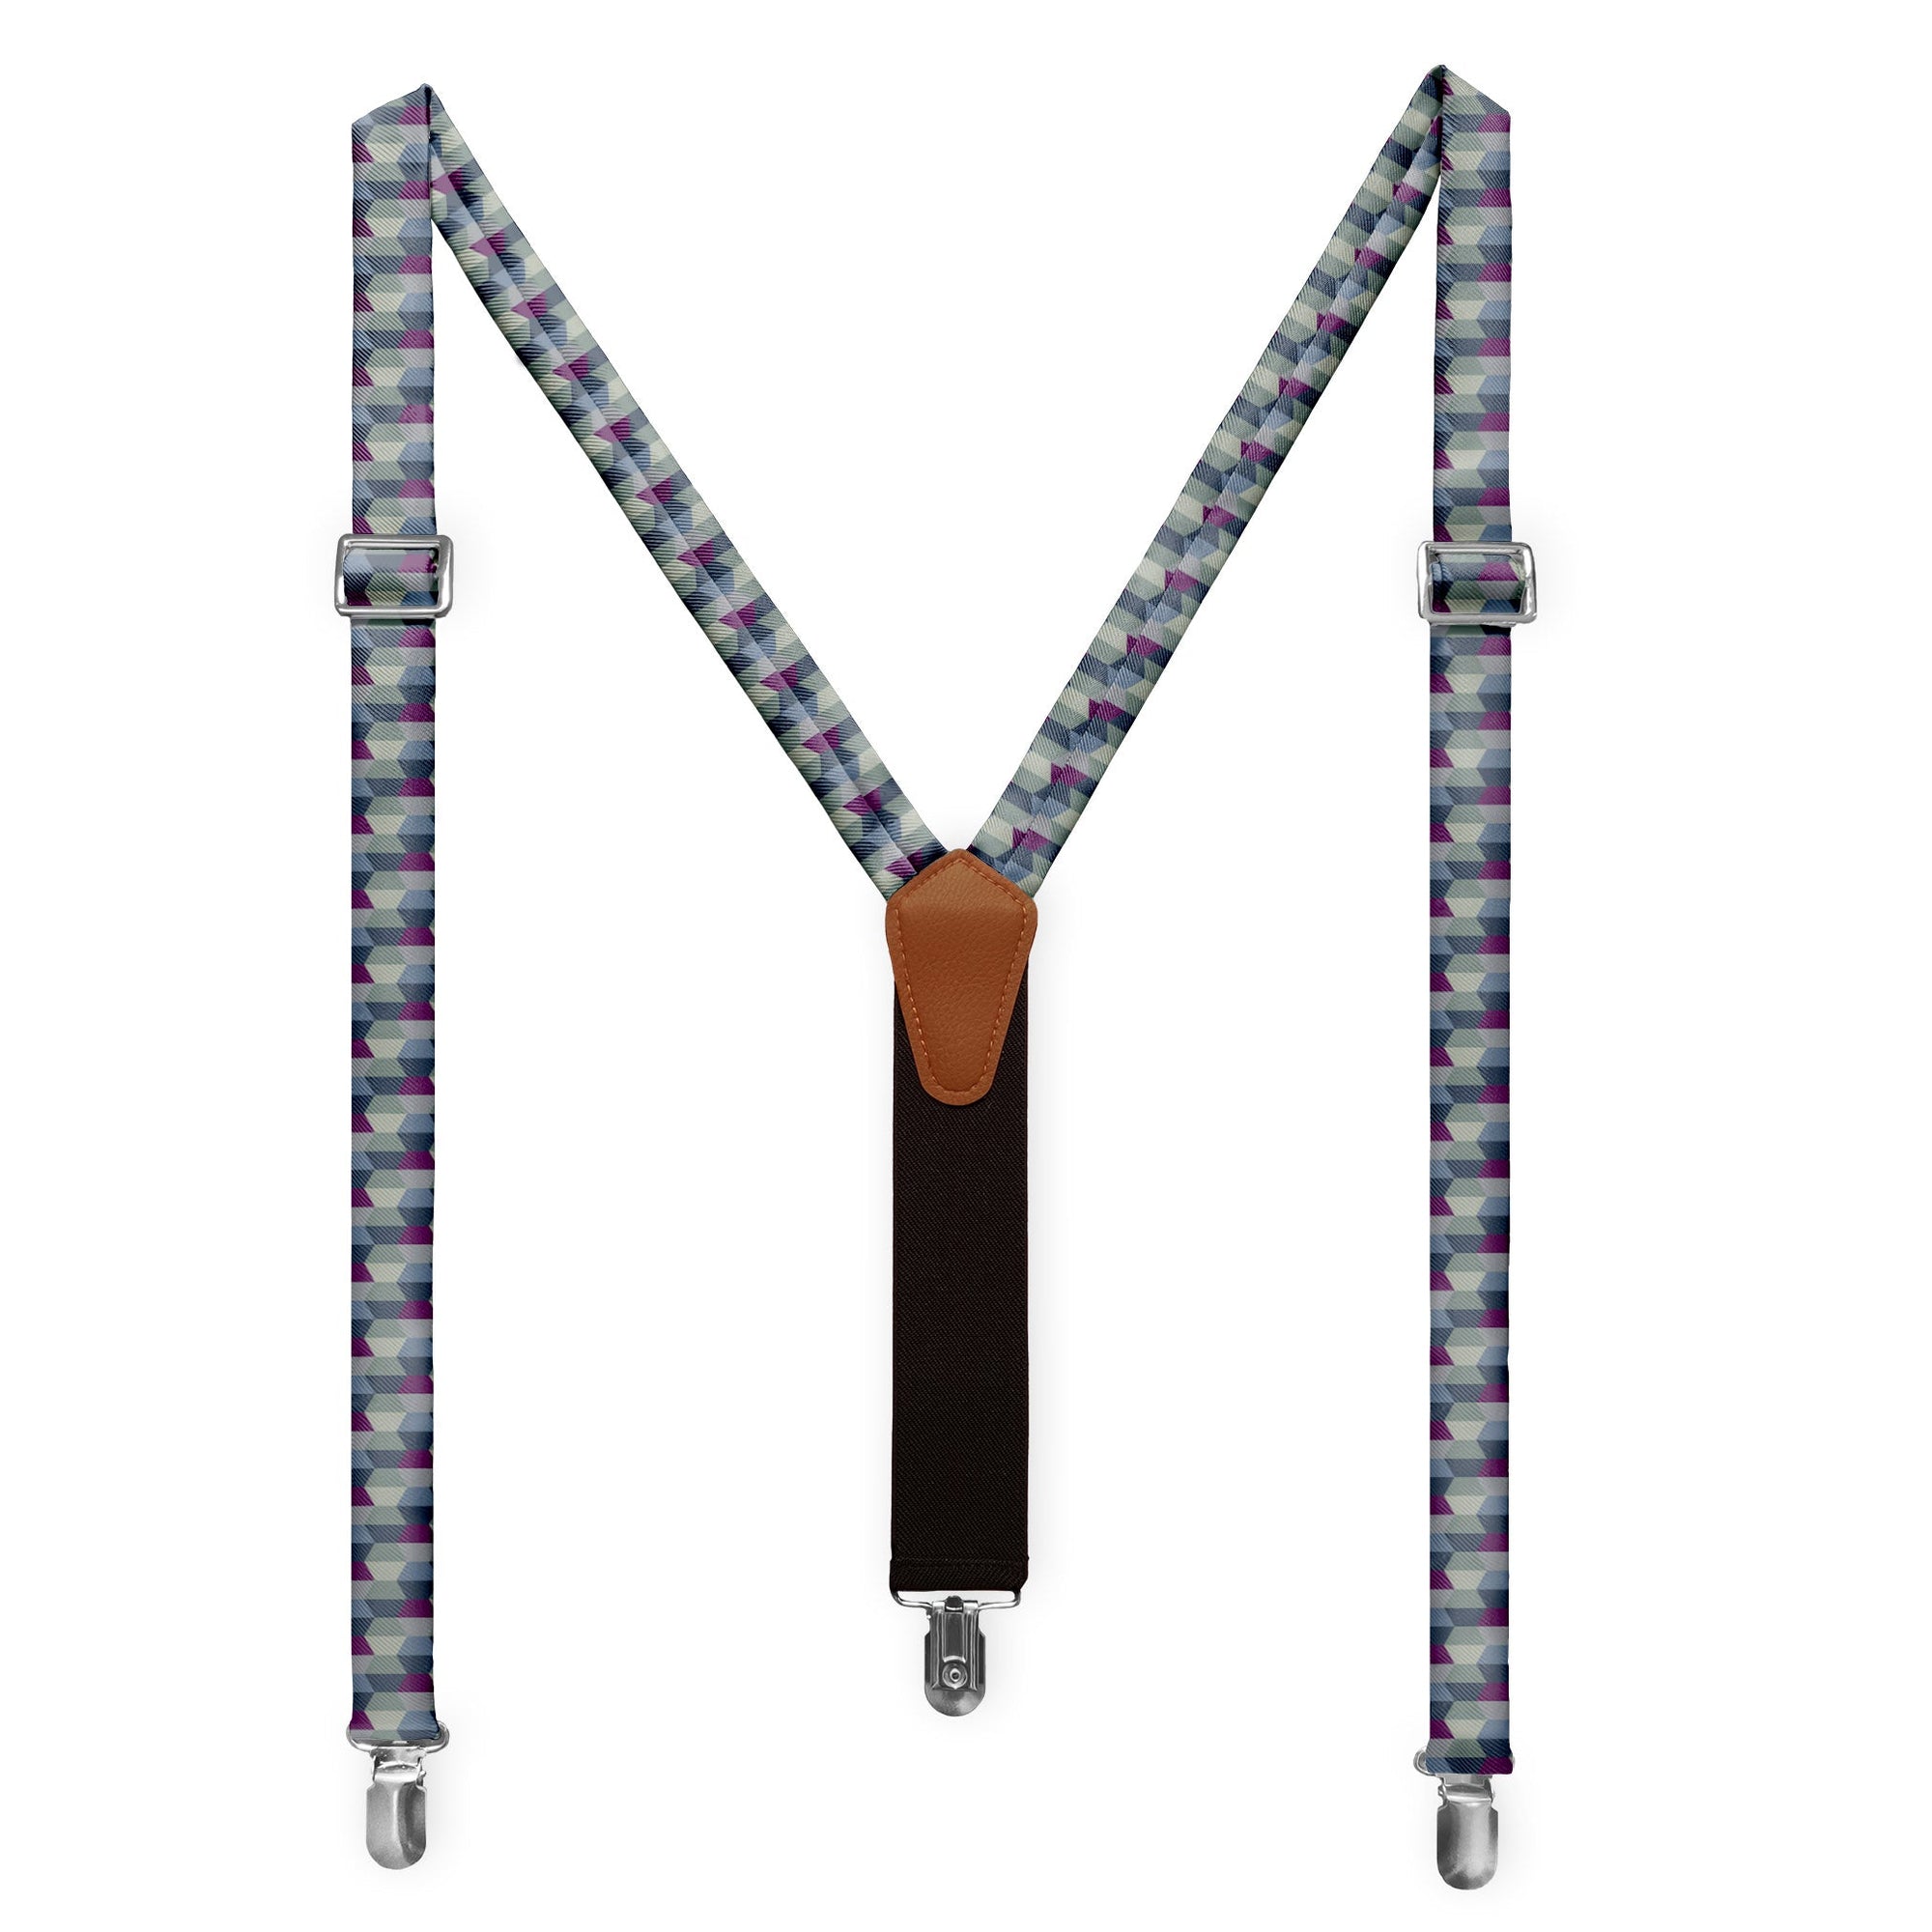 Men's Suspenders, Boys Suspenders, Tan Suspenders, Light Brown Suspenders,  Striped Suspenders, Boy Suspenders, for Children and Adults -  Canada